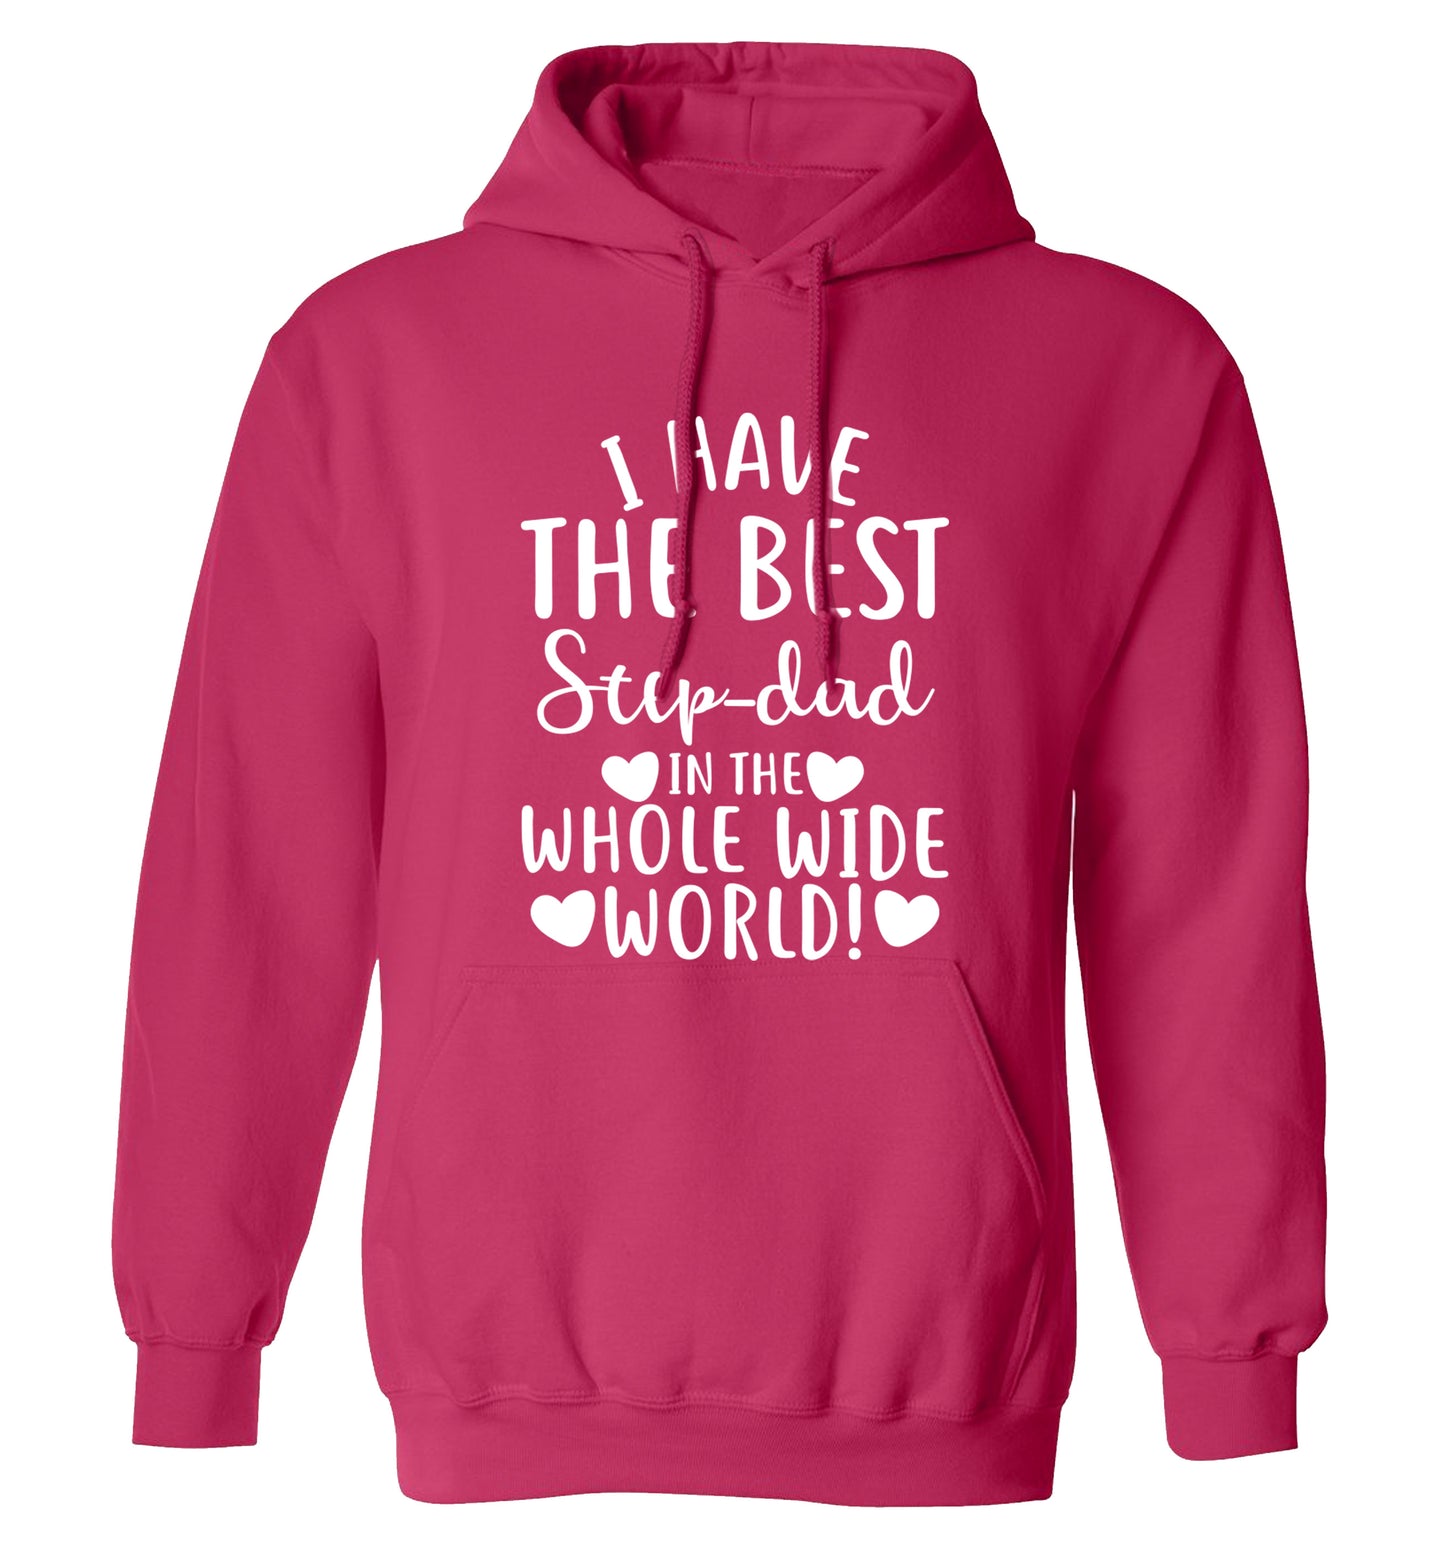 I have the best step-dad in the whole wide world! adults unisex pink hoodie 2XL